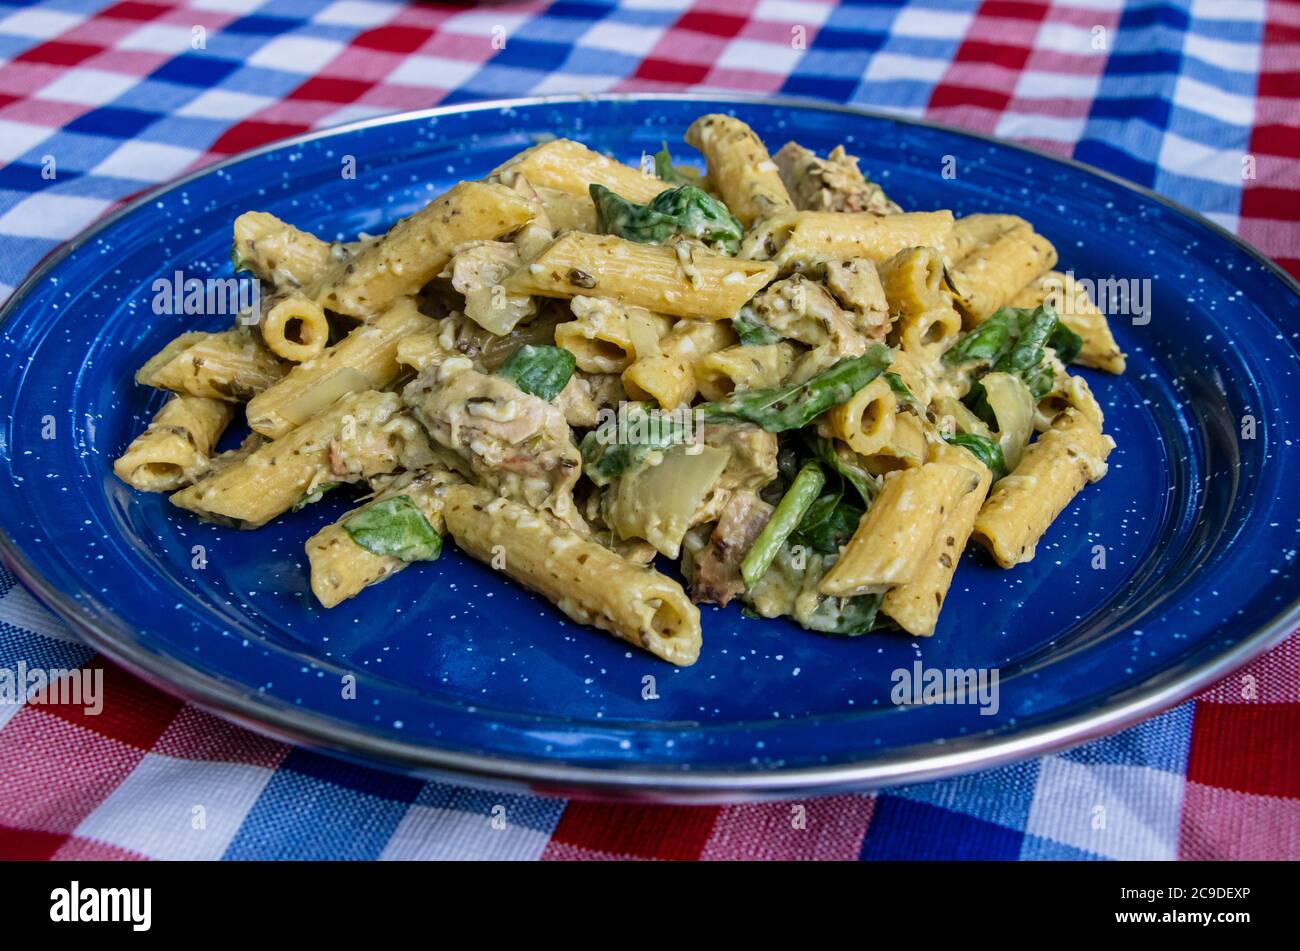 Cheesy Pesto, cream cheese, spinach and vegetarian chicken Penne pasta in a enamel plate on a picnic table at night, Camping dinner meal Stock Photo